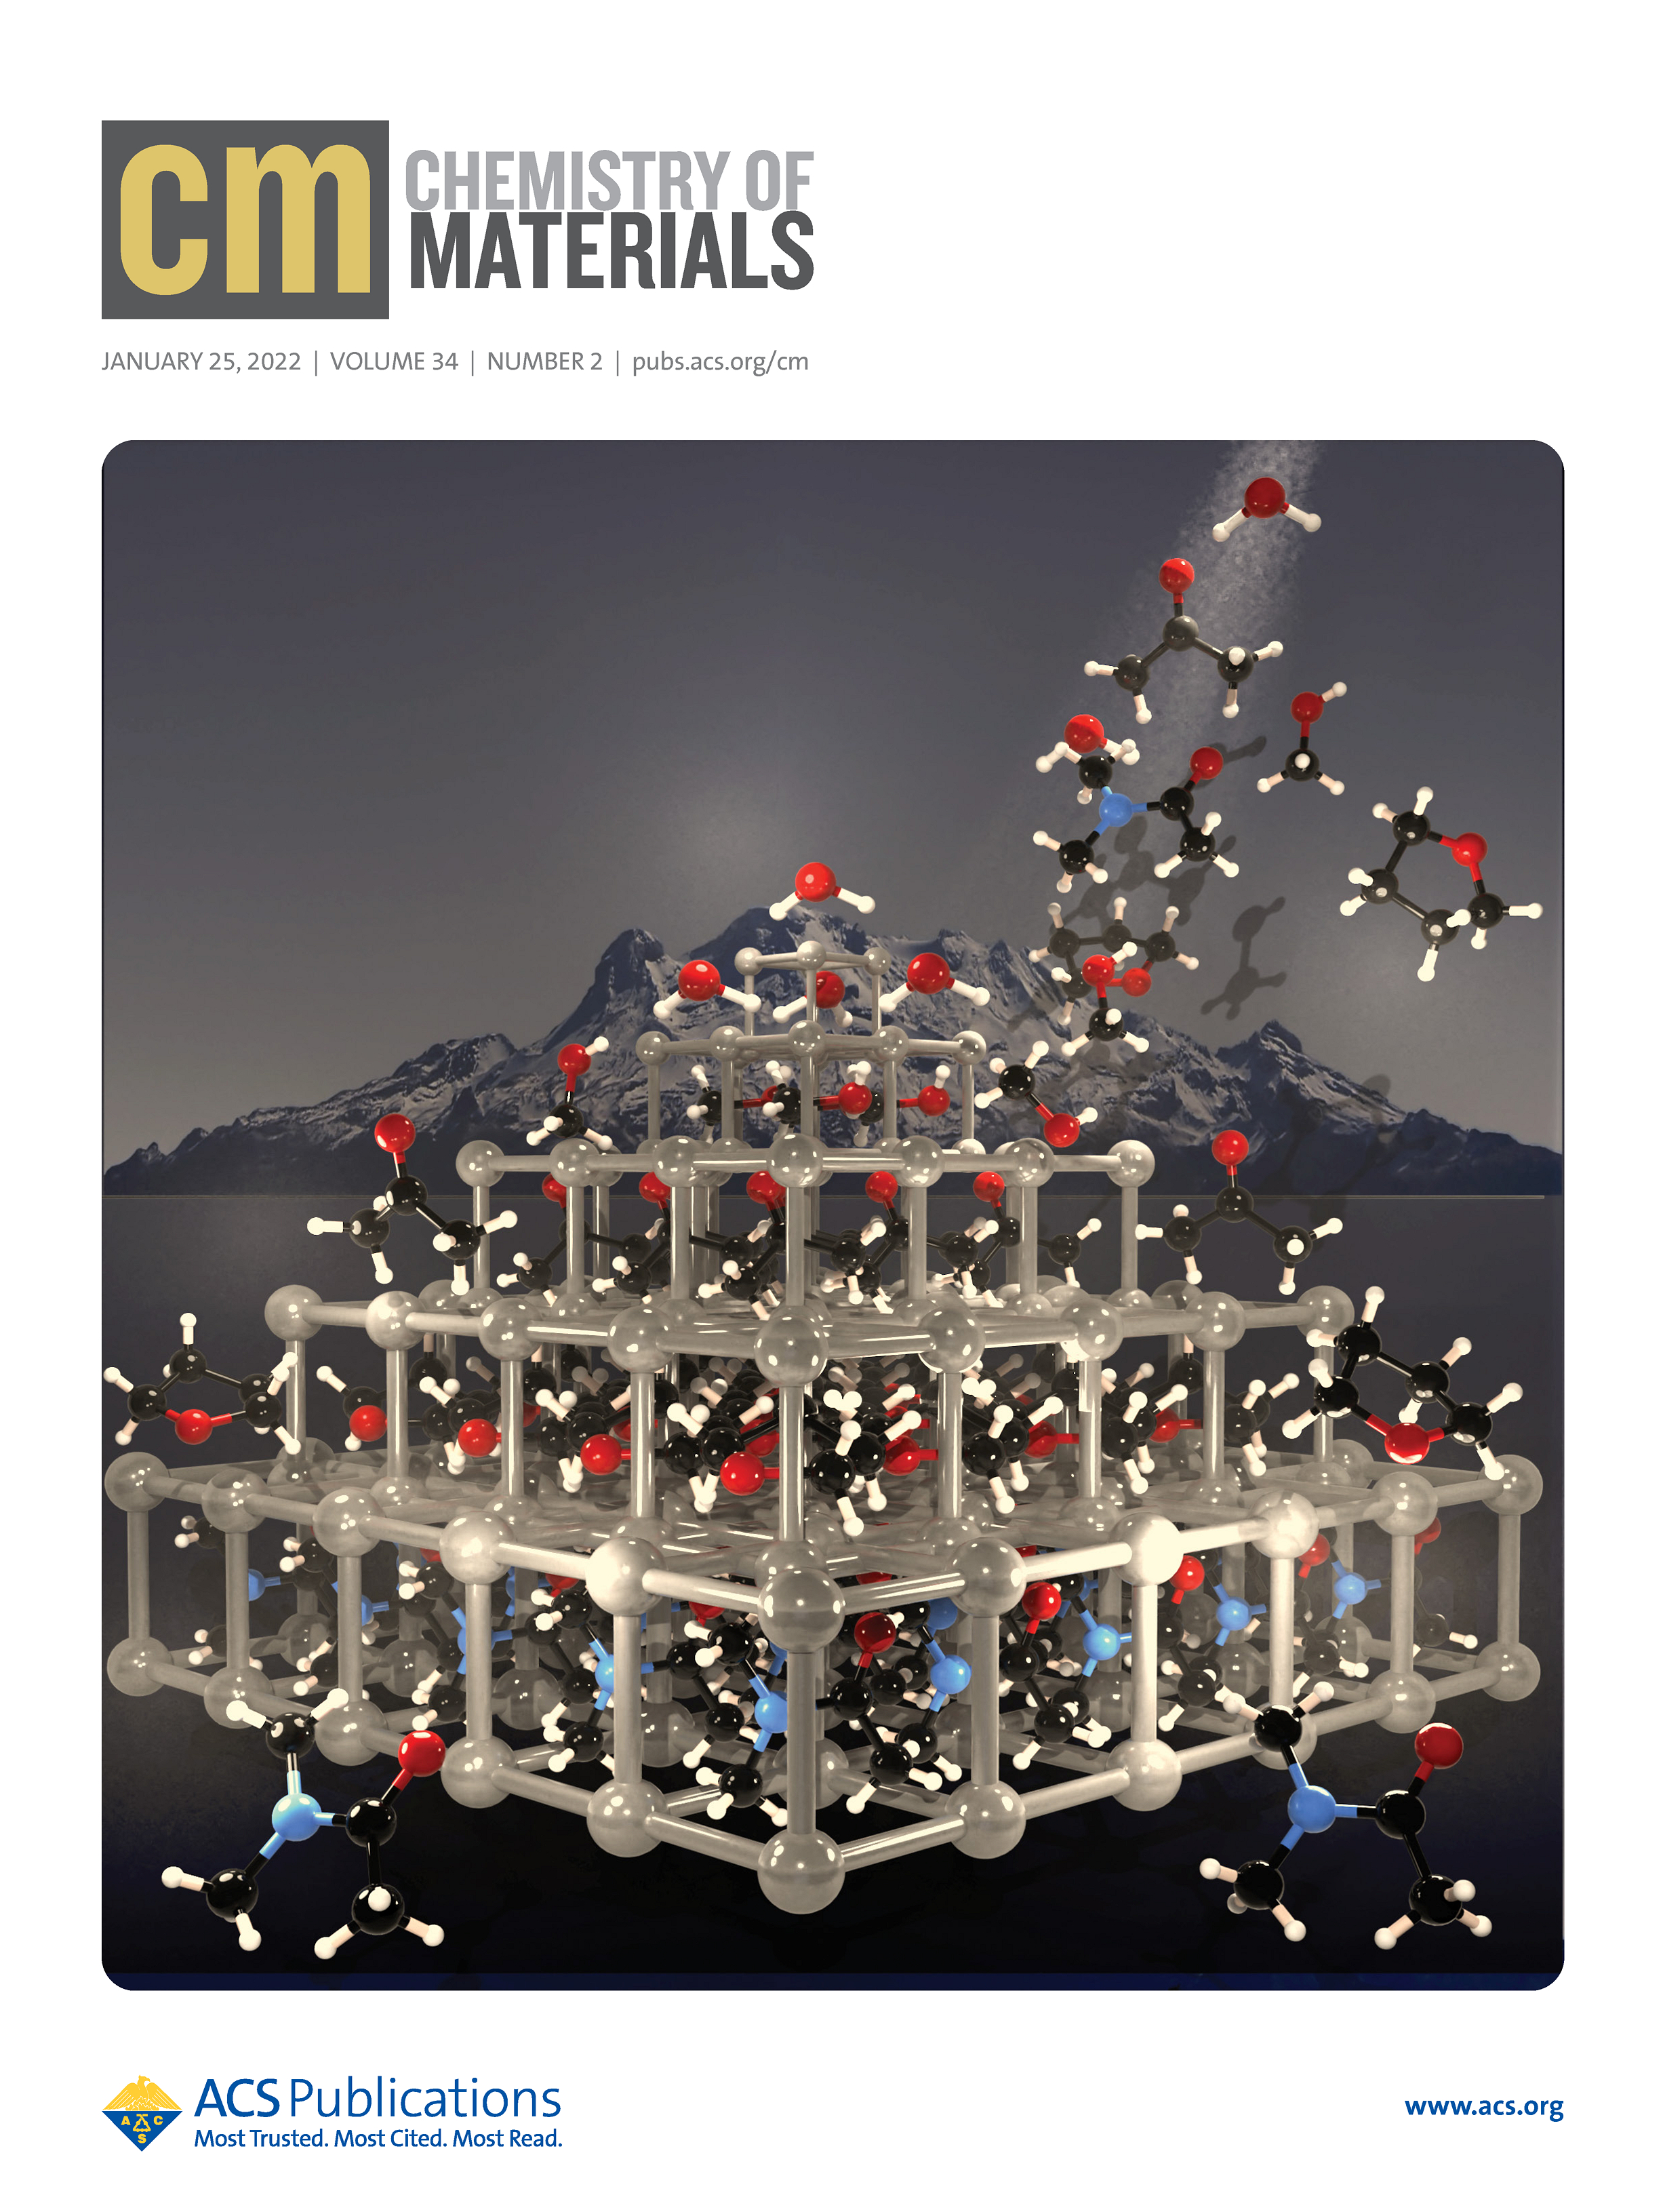 Chemistry of Materials_Cover of the Magazine: